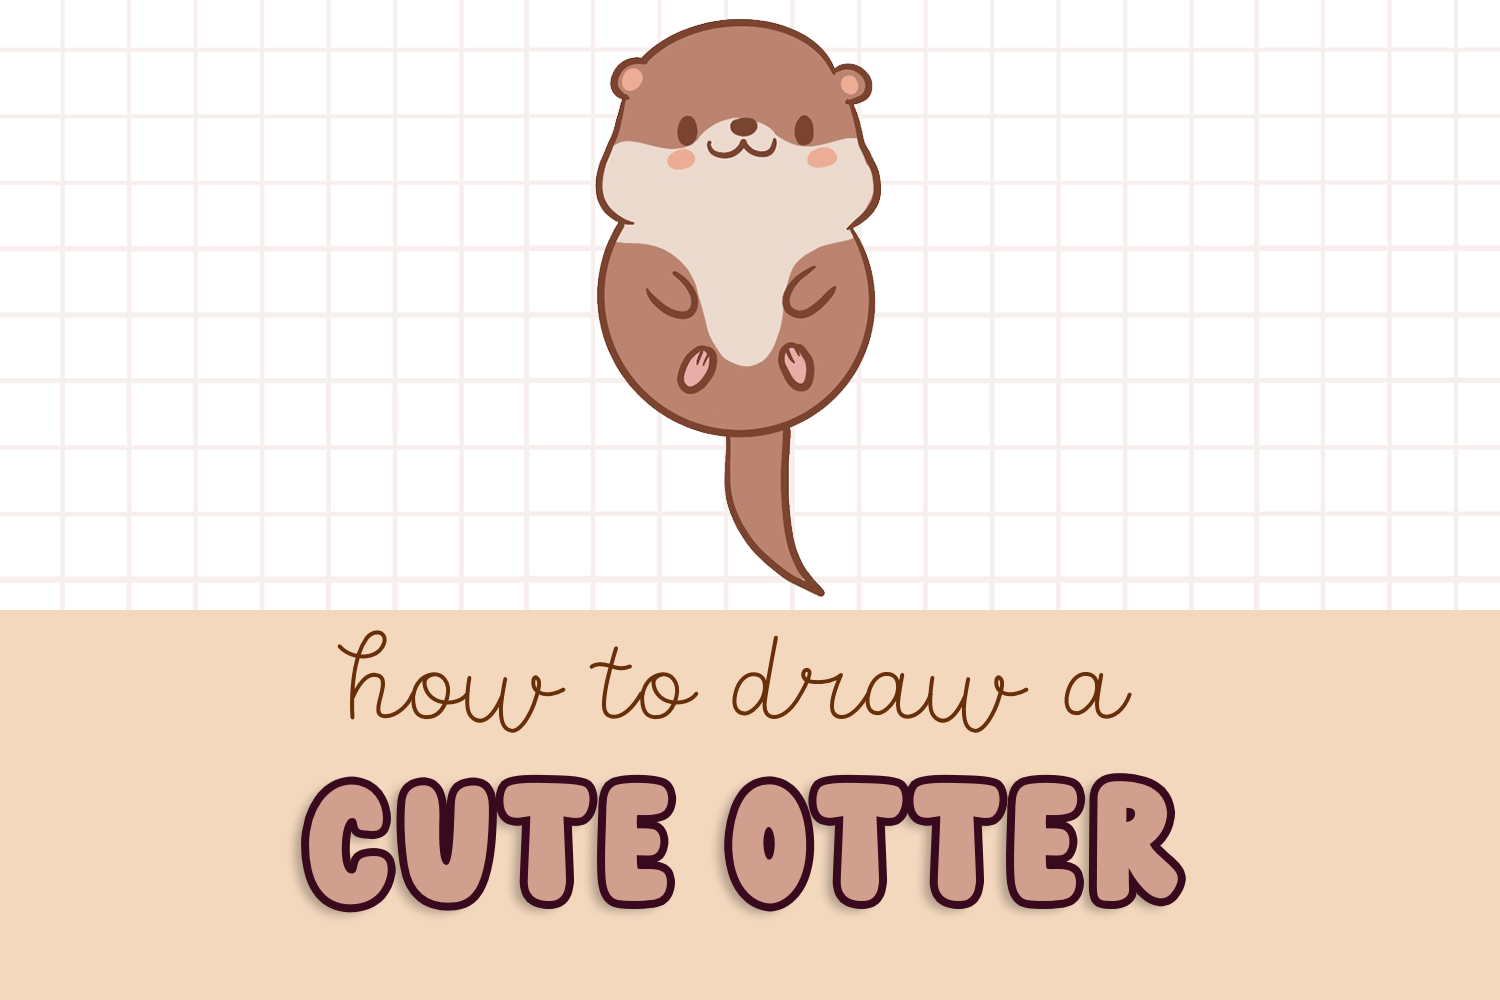 How to Draw a Cute Otter (Easy Beginner Guide)